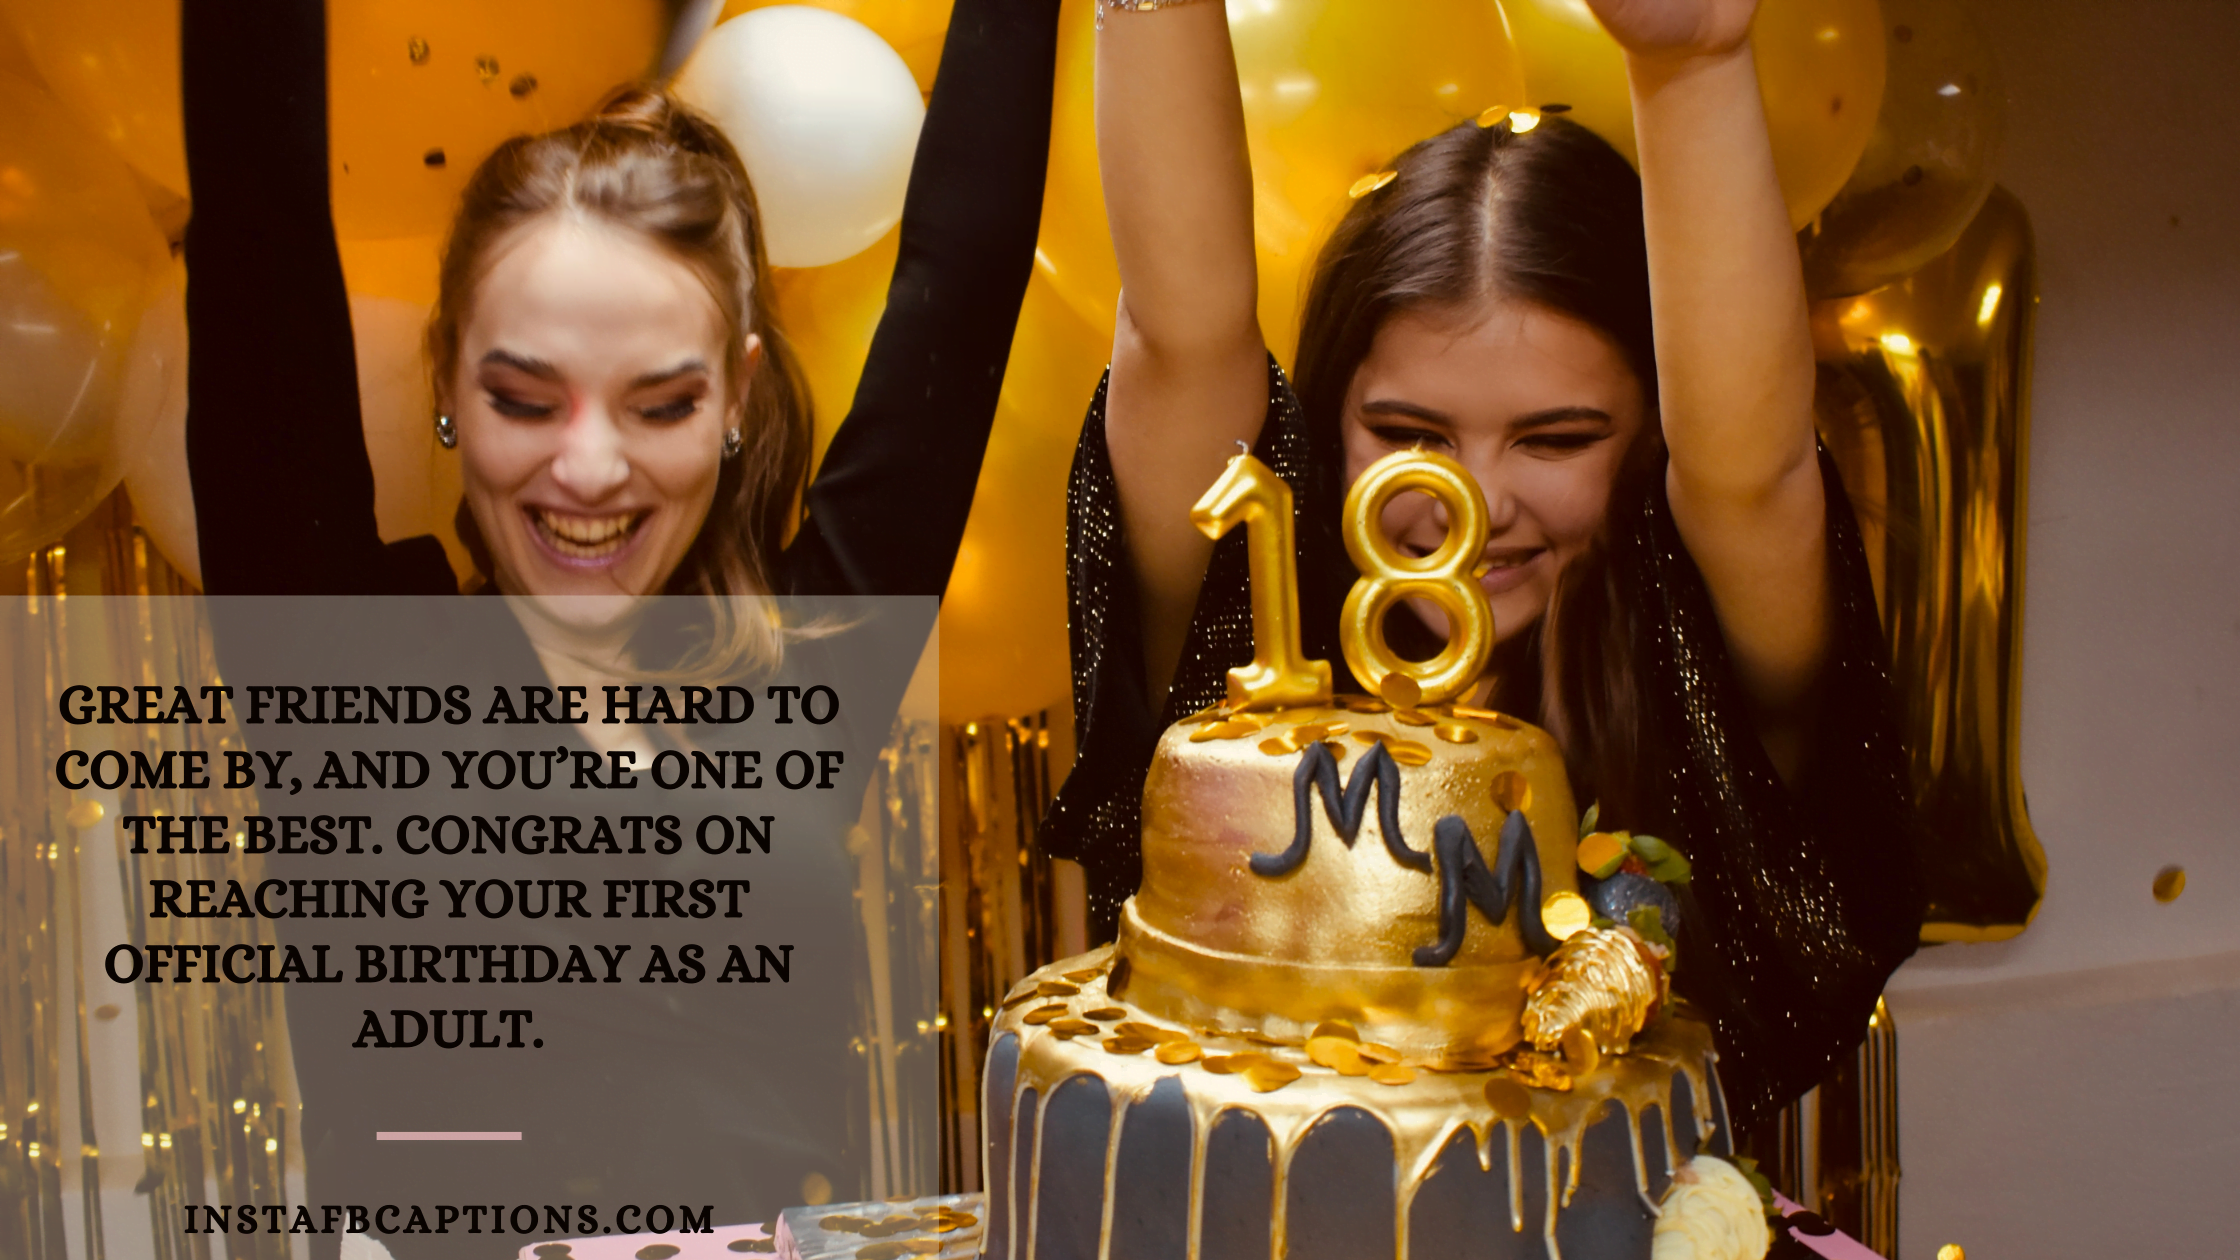 Great friends are hard to come by, and you’re one of the best. Congrats on reaching your first official birthday as an adult. 18th birthday caption - 18th birthday wishes for best friend  - 165+ Best 18th Birthday Captions For Instagram